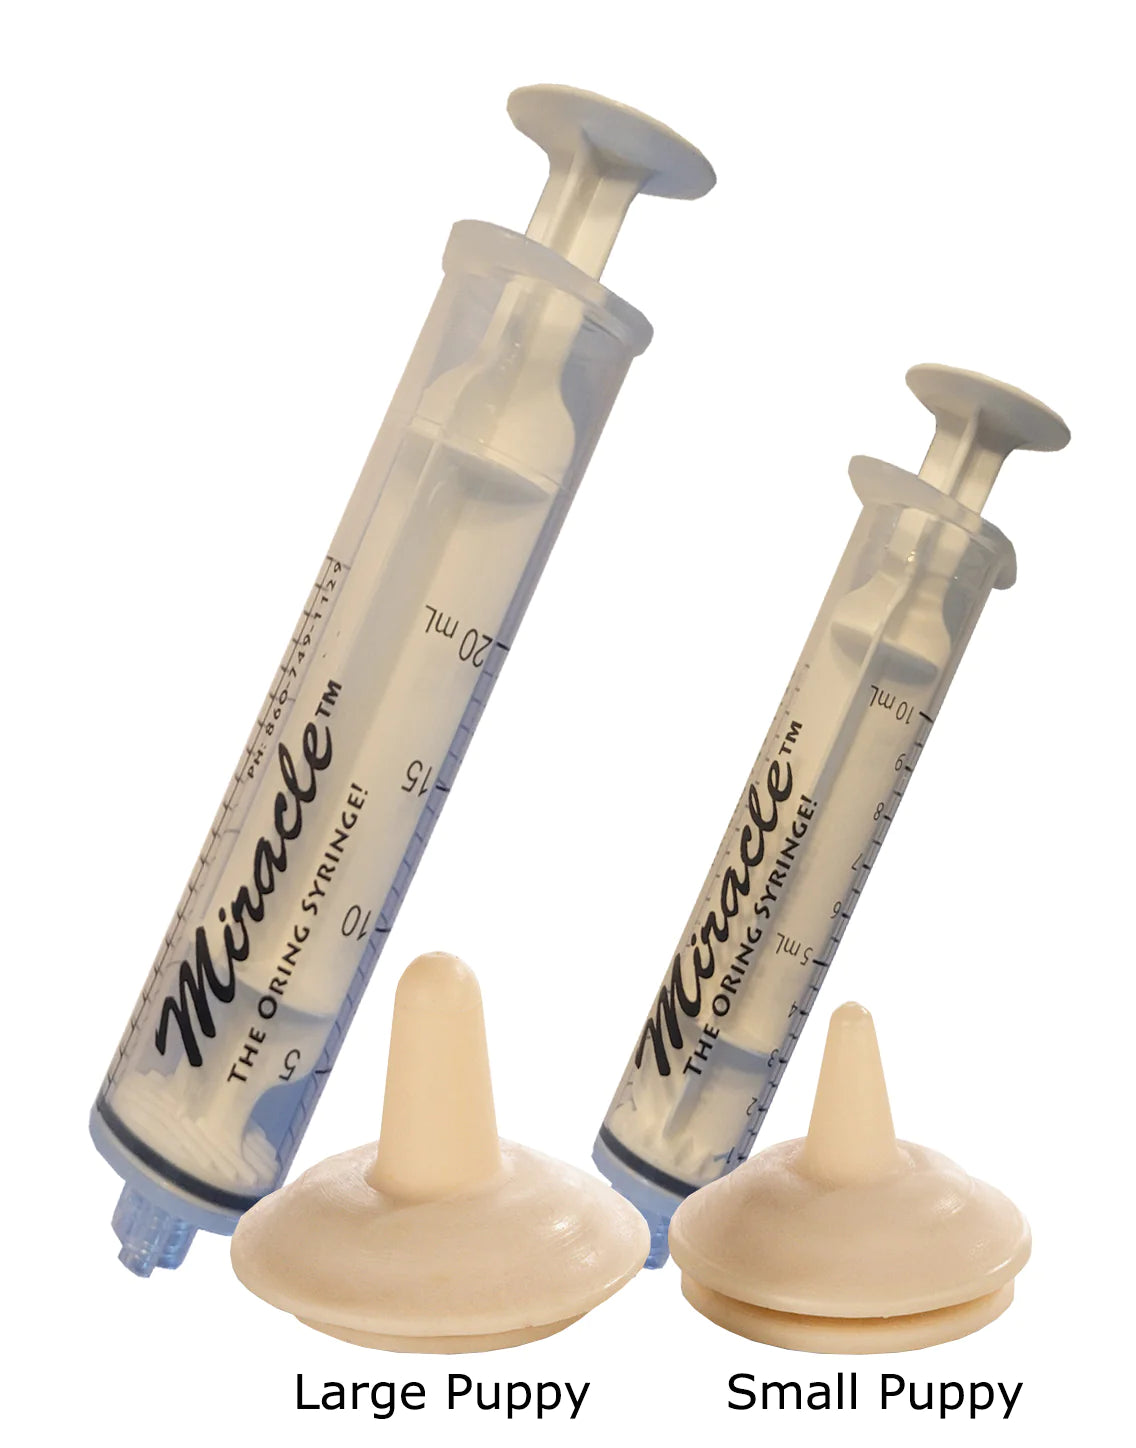 NEW Puppy Sample Set - consists of 1 large puppy, 1 small puppy, 1-10 ml & 1-20ml Oring Syringe